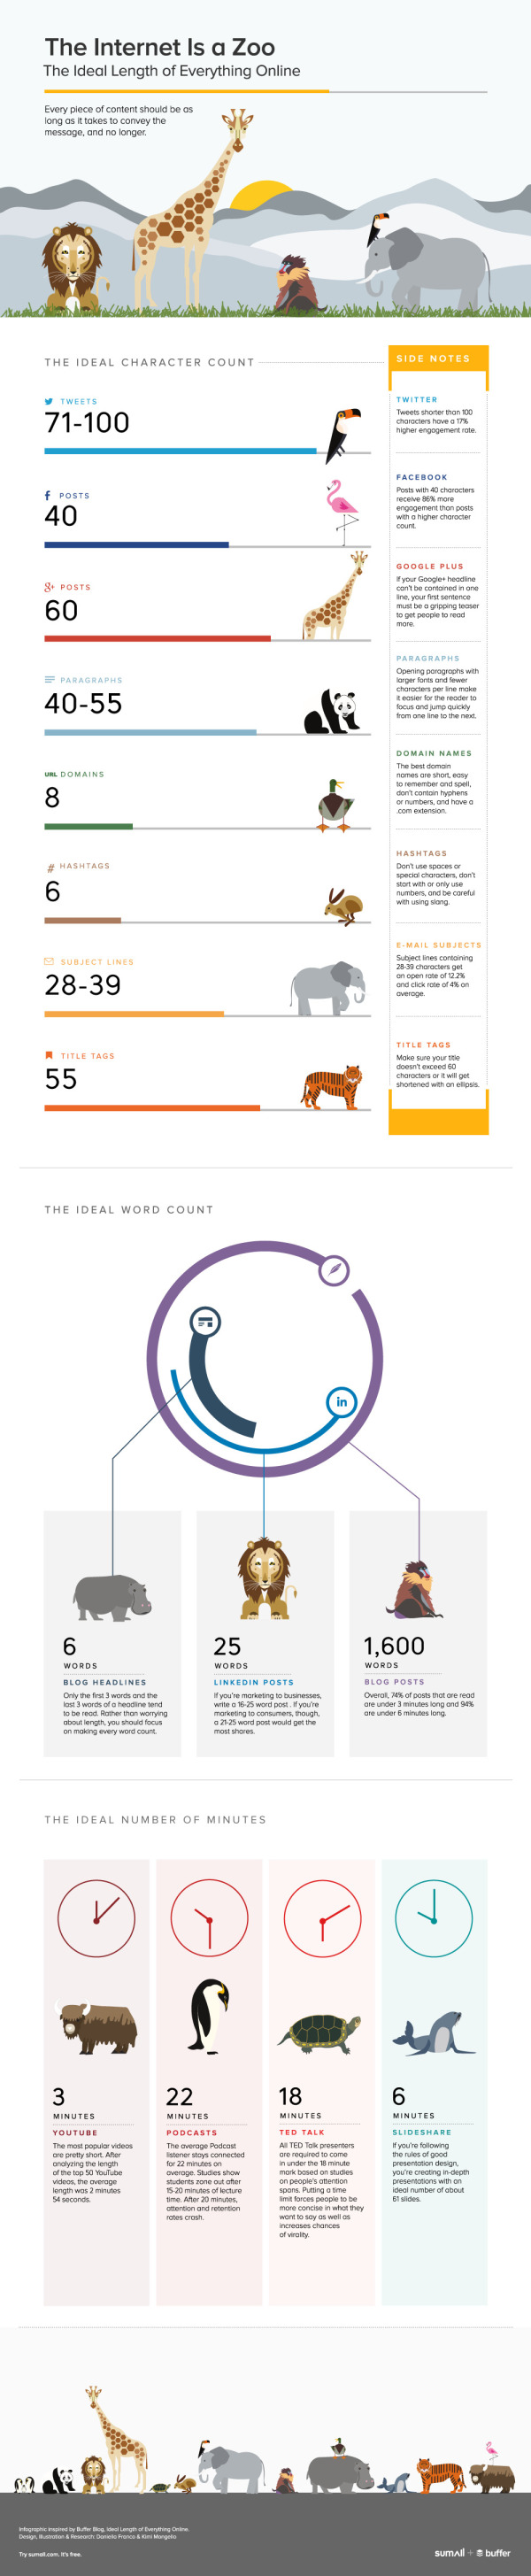 The Internet Is a Zoo: The Ideal Length of Everything Online infographic